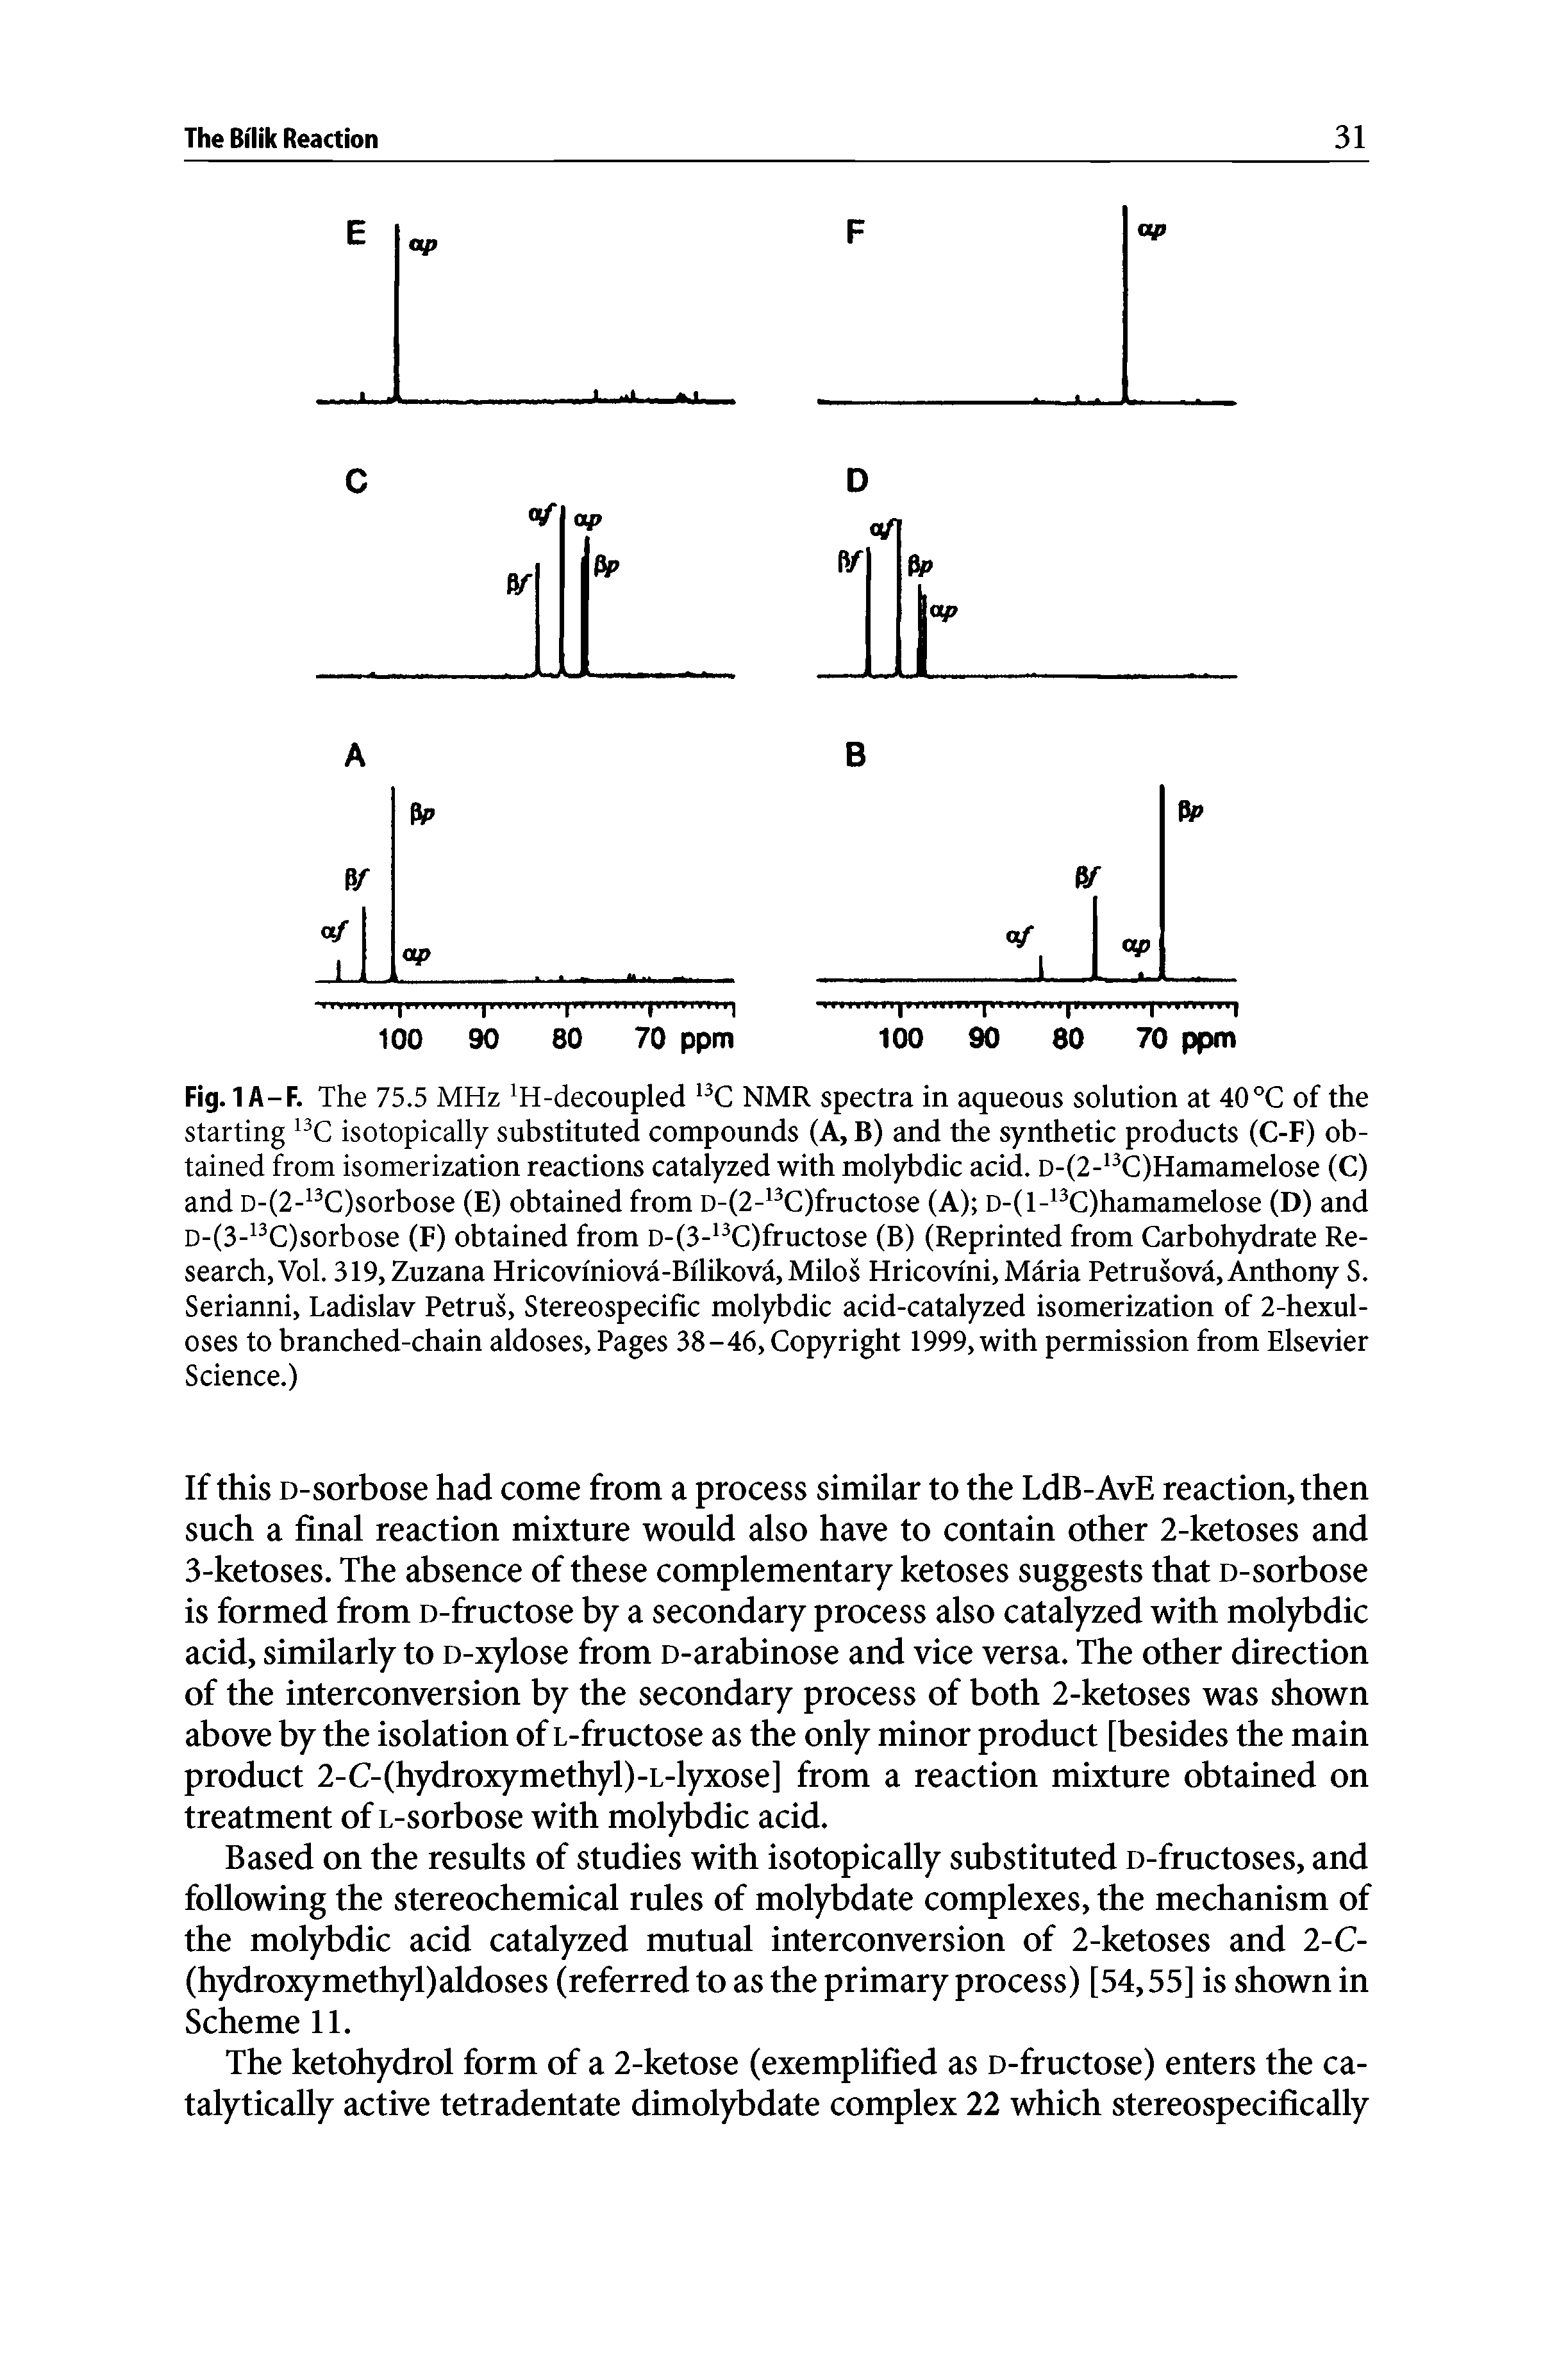 Fig. 1A-F. The 75.5 MHz H-decoupled NMR spectra in aqueous solution at 40°C of the starting isotopically substituted compounds (A, B) and the synthetic products (C-F) obtained from isomerization reactions catalyzed with molybdic acid. D-(2- C)Hamamelose (C) and D-(2- C)sorbose (E) obtained from D-(2- C)fructose (A) D-(l- C)hamamelose (D) and D-(3- C)sorbose (F) obtained from D-(3- C)fructose (B) (Reprinted from Carbohydrate Research, Vol. 319, Zuzana Hricoviniova-Bflikovd, Milos Hricovini, Maria Petrusovd, Anthony S. Serianni, Ladislav Petrus, Stereospecific molybdic acid-catalyzed isomerization of 2-hexul-oses to branched-chain aldoses. Pages 38-46, Copyright 1999, with permission from Elsevier Science.)...